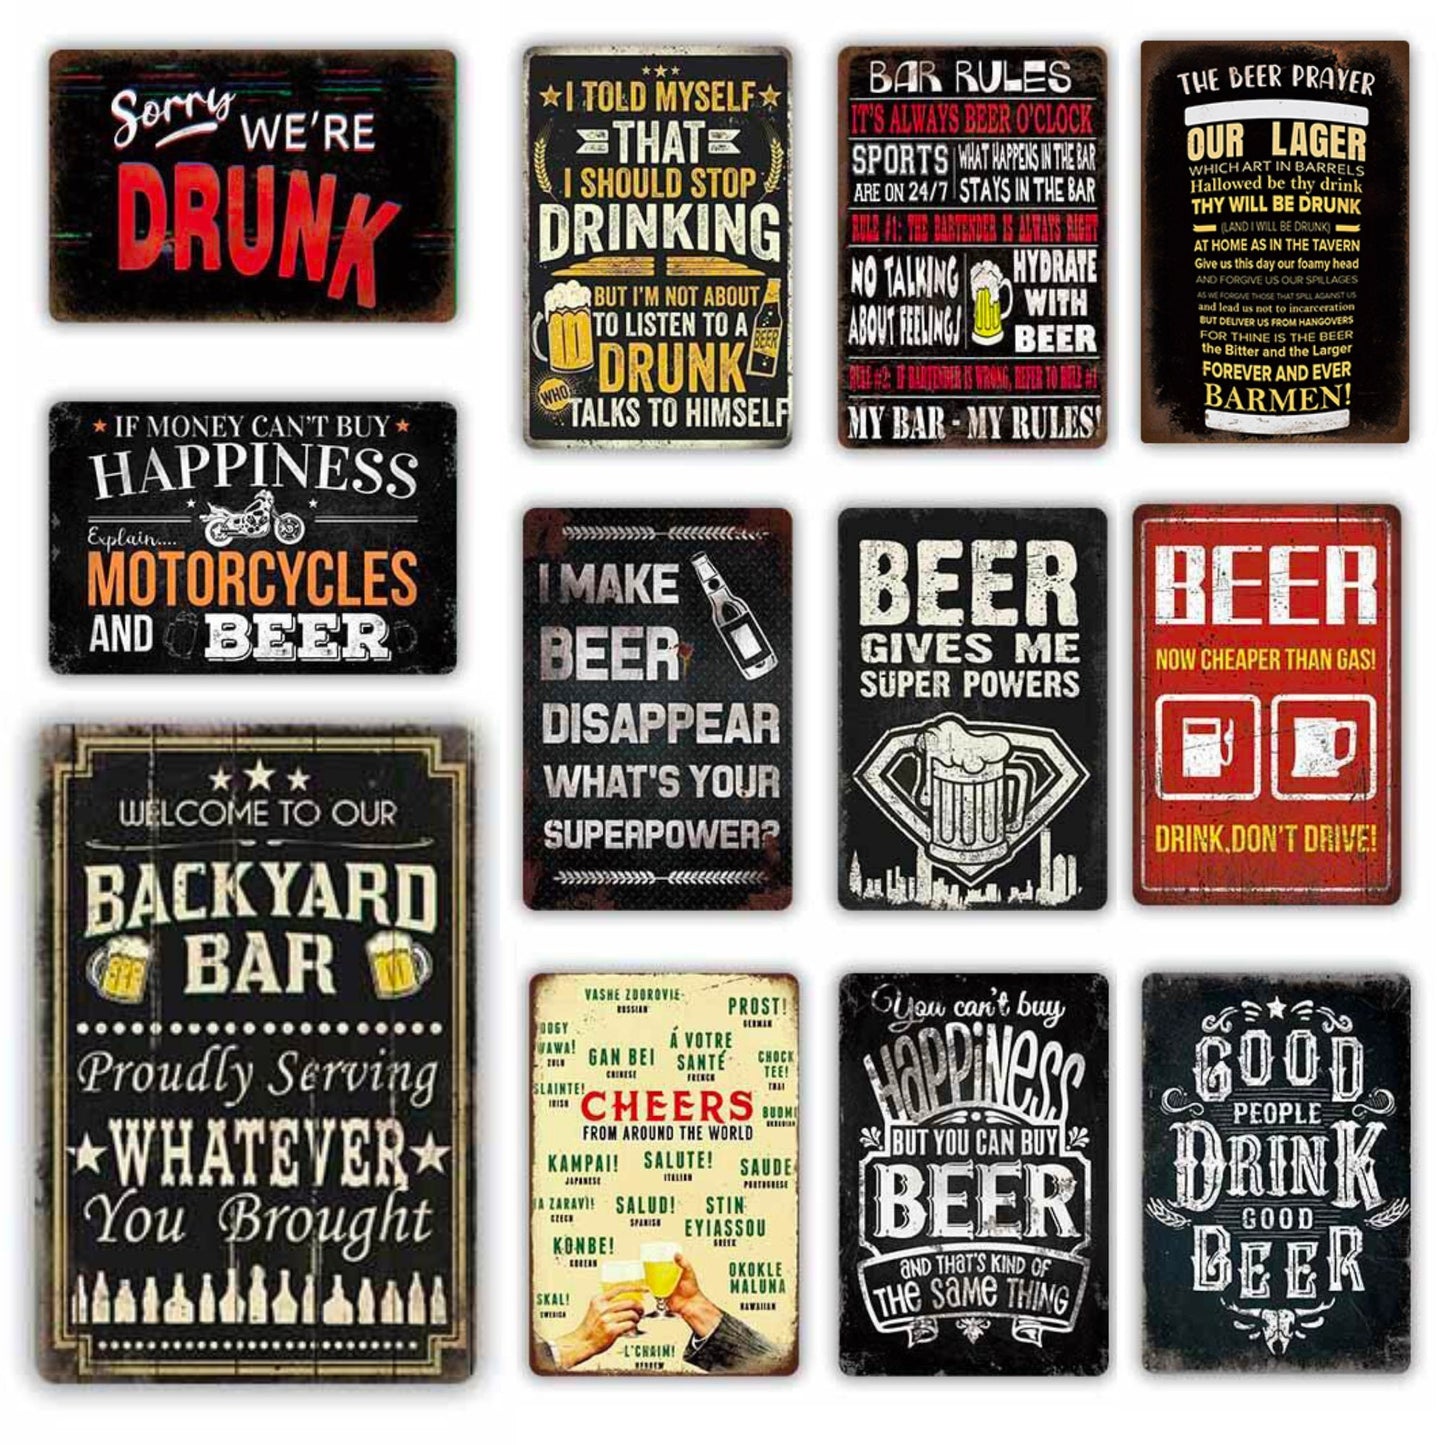 Funny Drinking Metal Sign Print | Shabby Chic Vintage Bar Decor For Kitchen Men Cave Garage | Beer Tin Plaque Gift For Friend | Papagaio Studio Etsy Shop